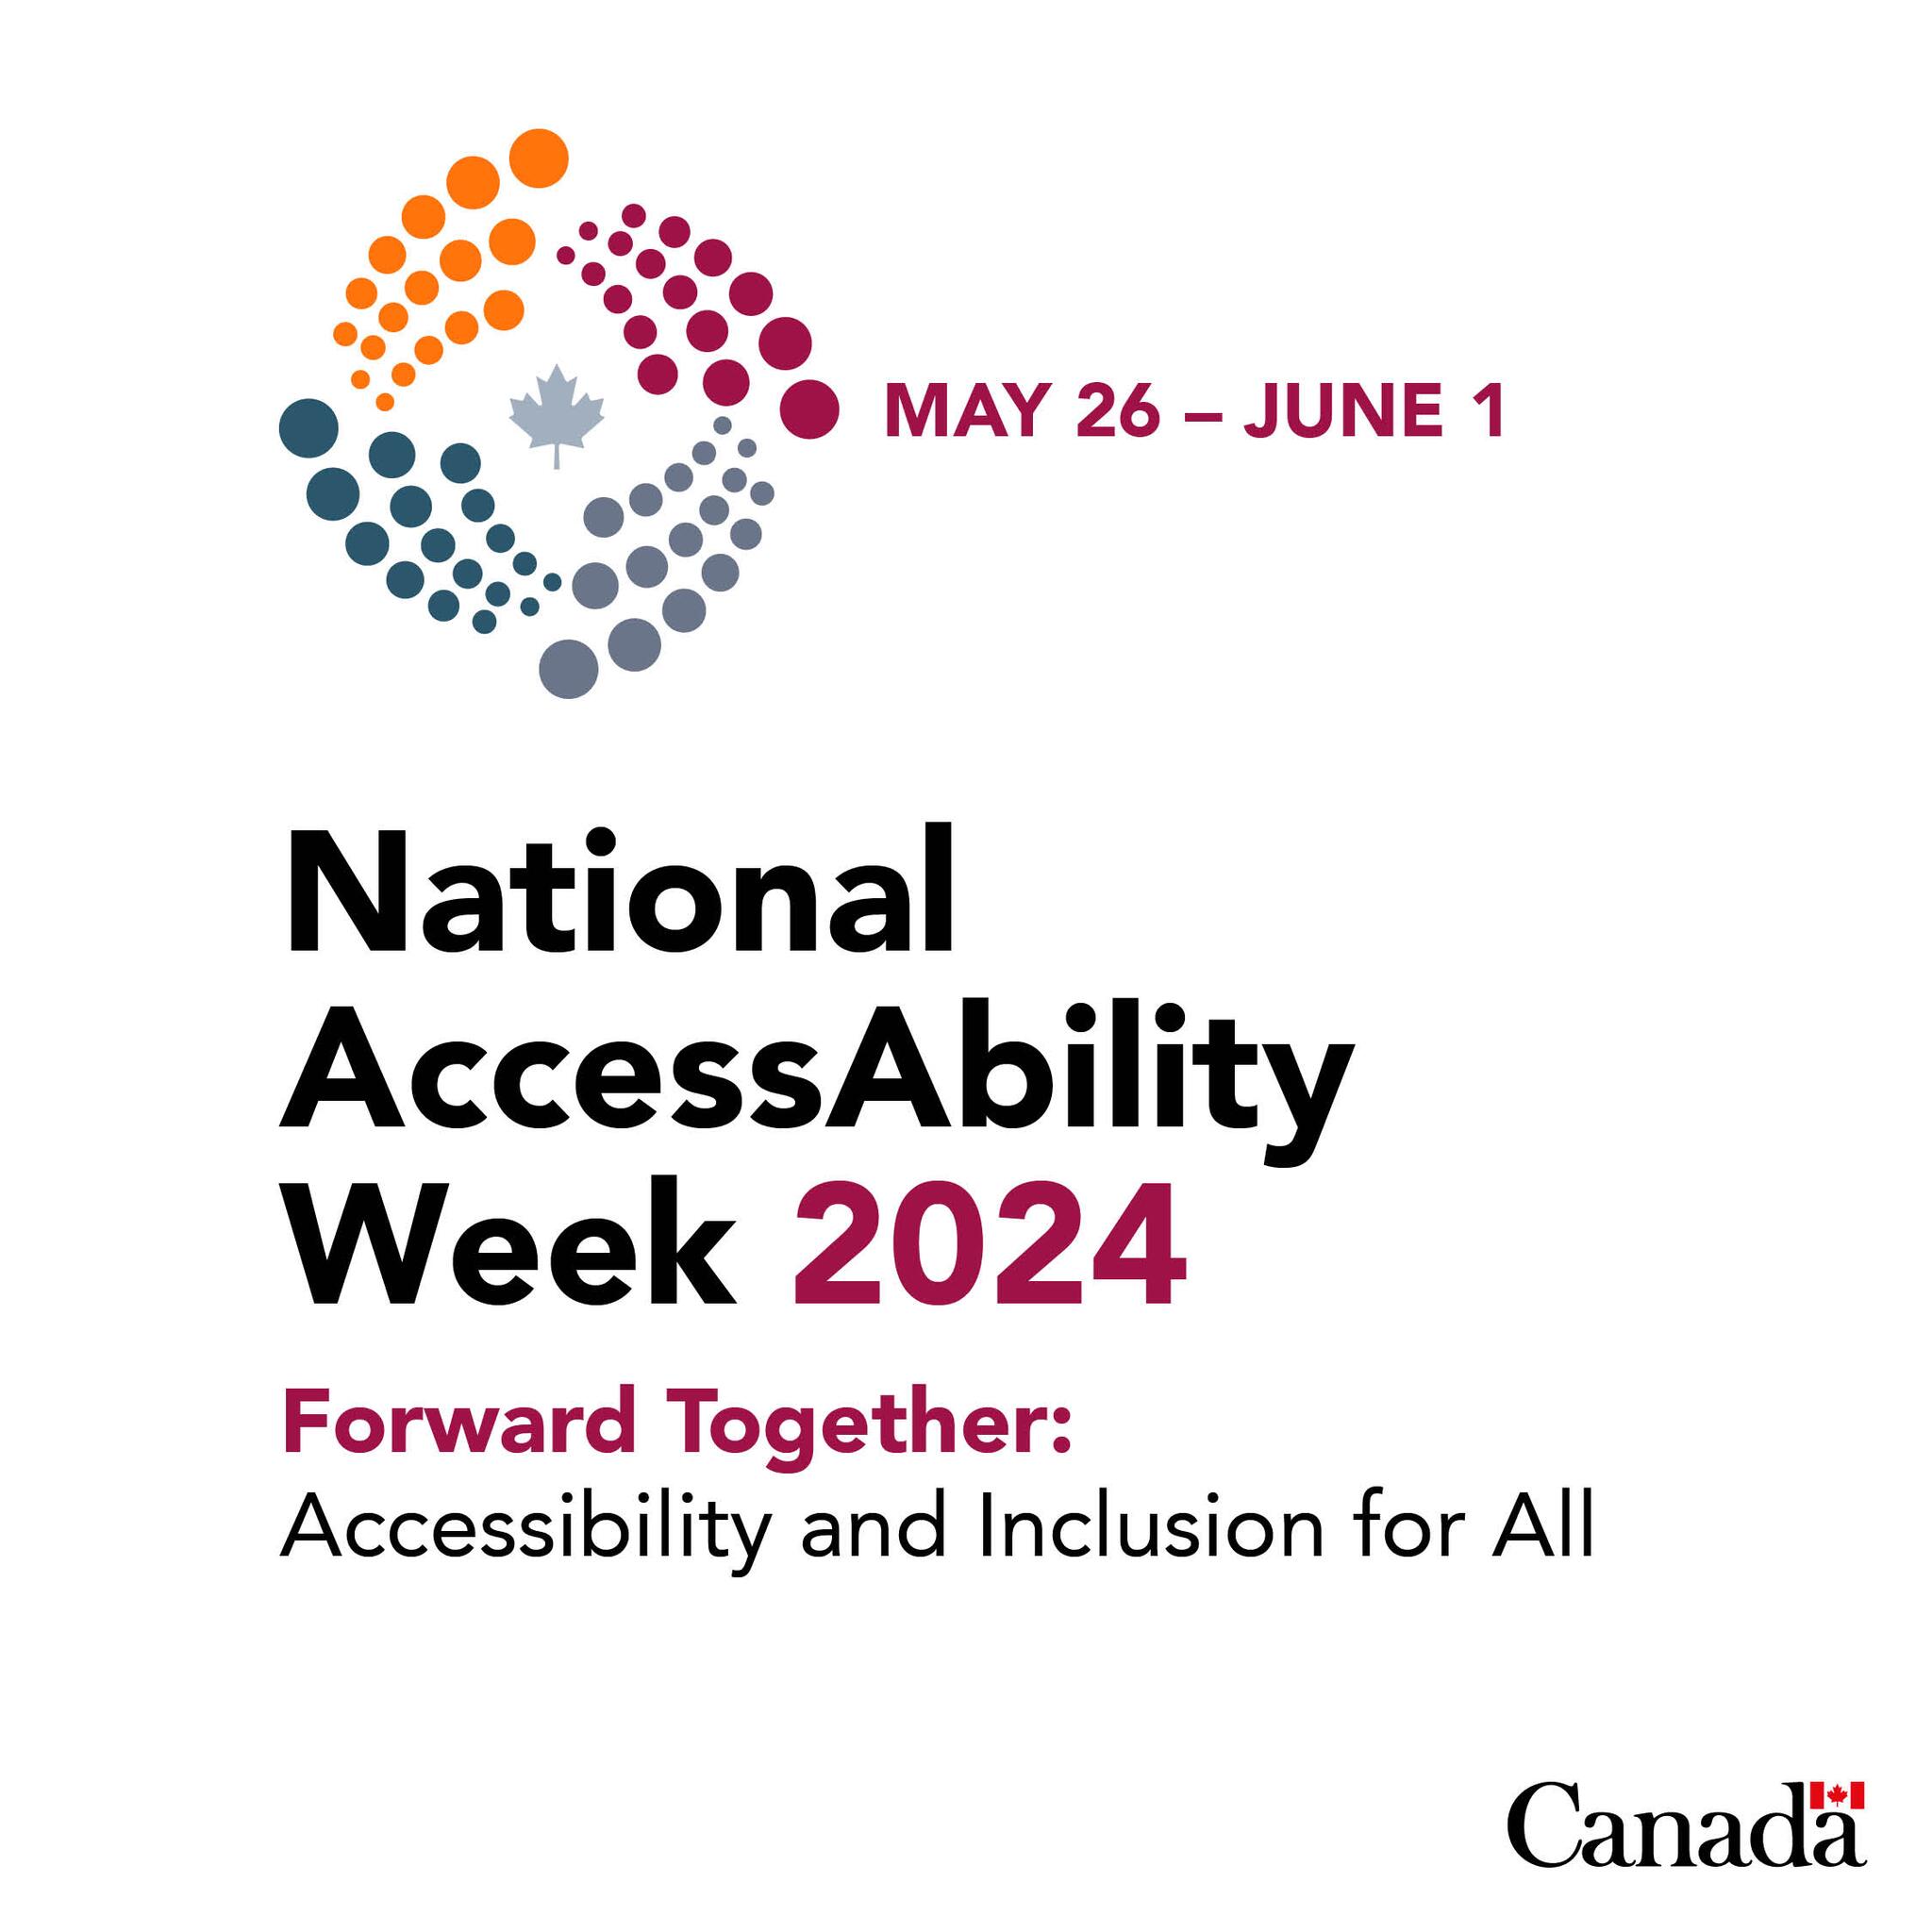 the logo for the week which includes dots in orange, red, grey, and blue swirling around a maple leaf with the words May 26 - June 1 National AccessAbility Week 2024 Forward Together: Accessibility and Inclusion for All 